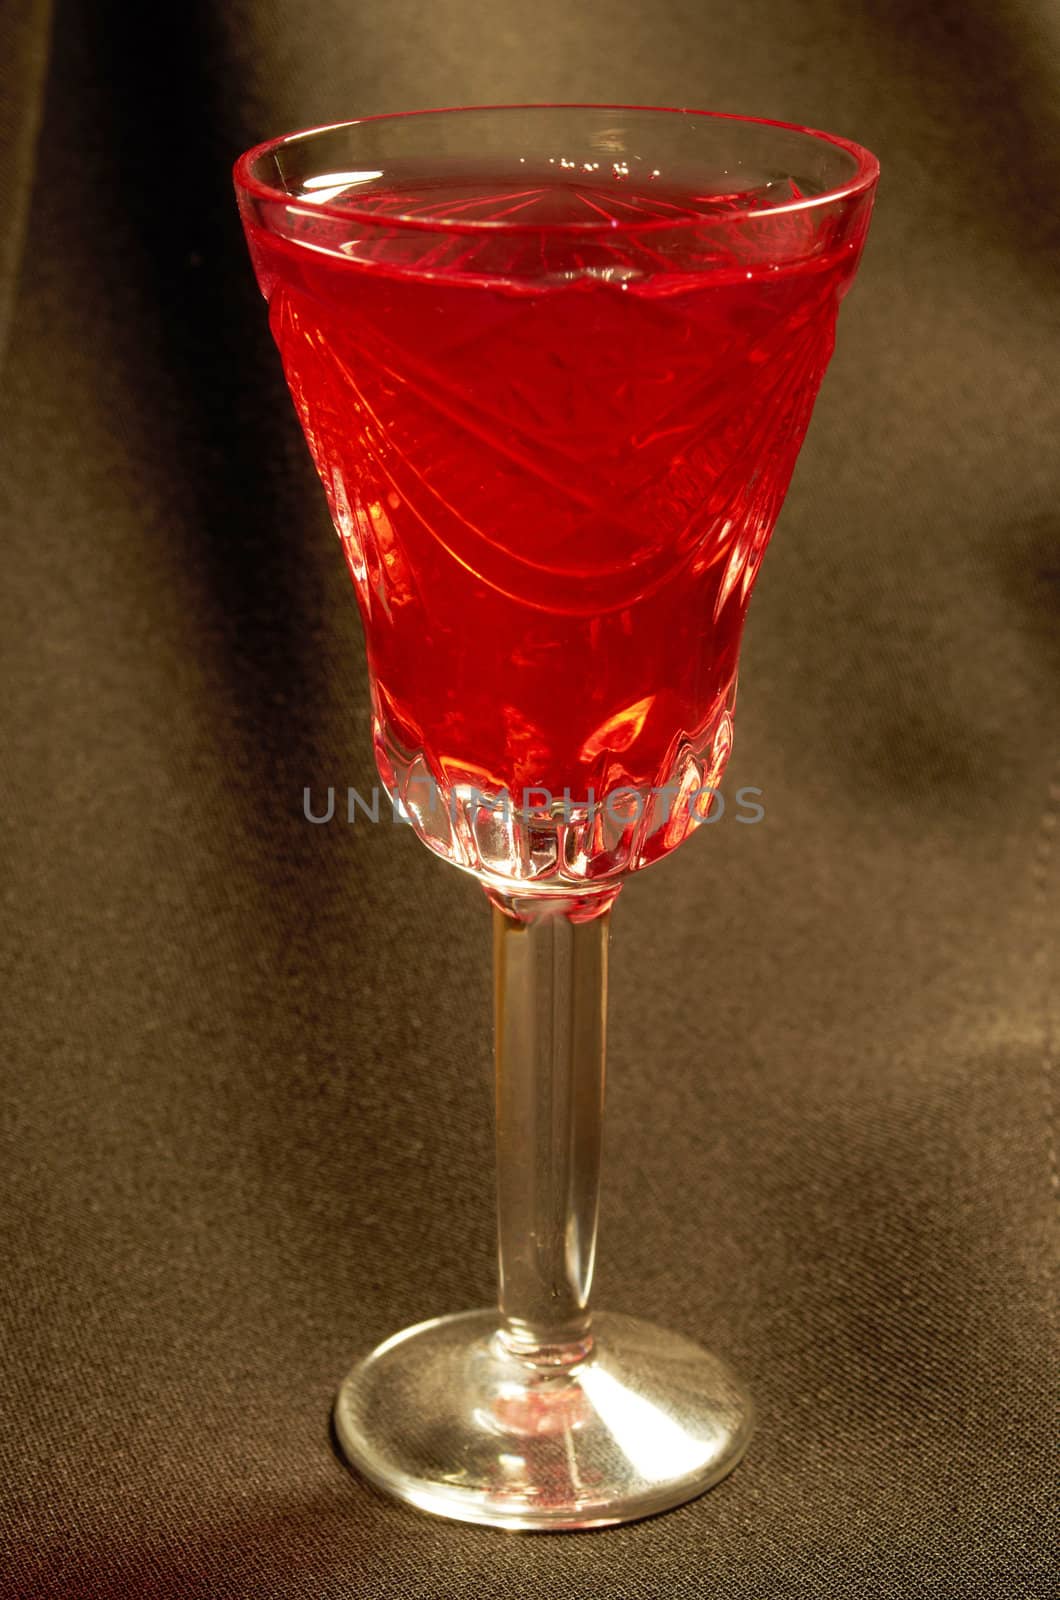 Crystal glass filled with red wine on a black background